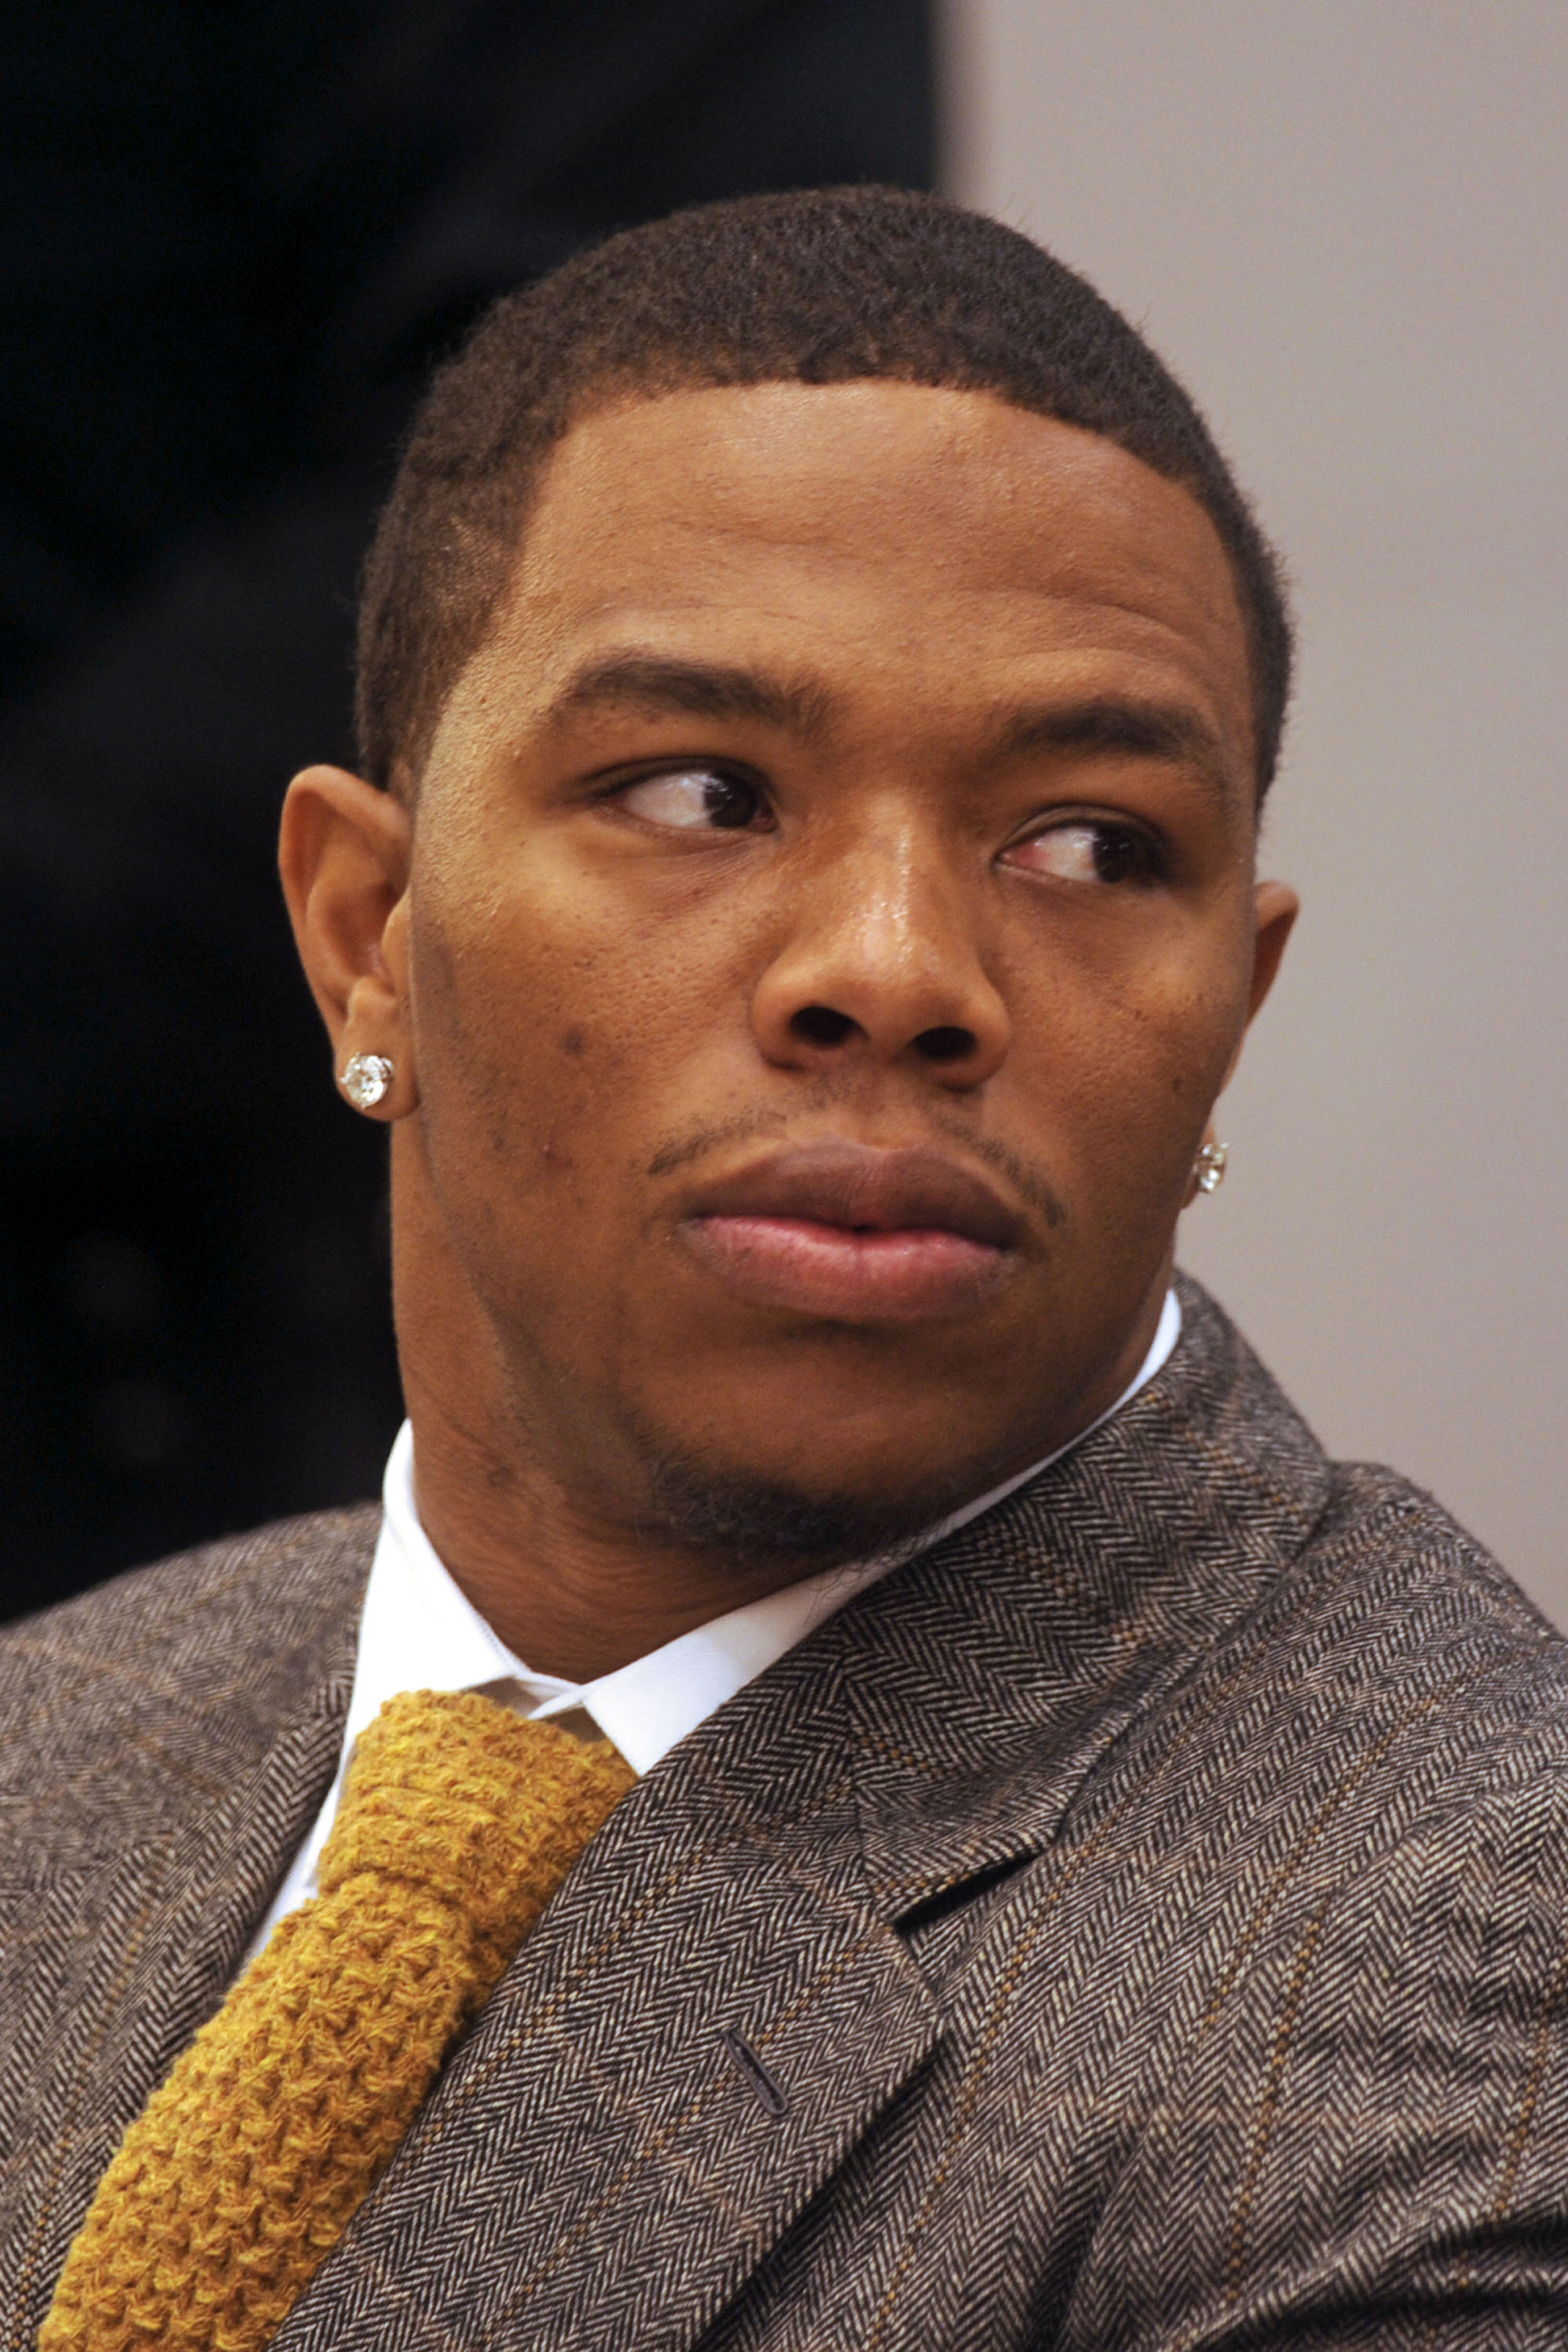 Former Baltimore Ravens running back Ray Rice during his arraignment at the Atlantic County Courthouse in Mays Landing, N.J. on May 1, 2014.